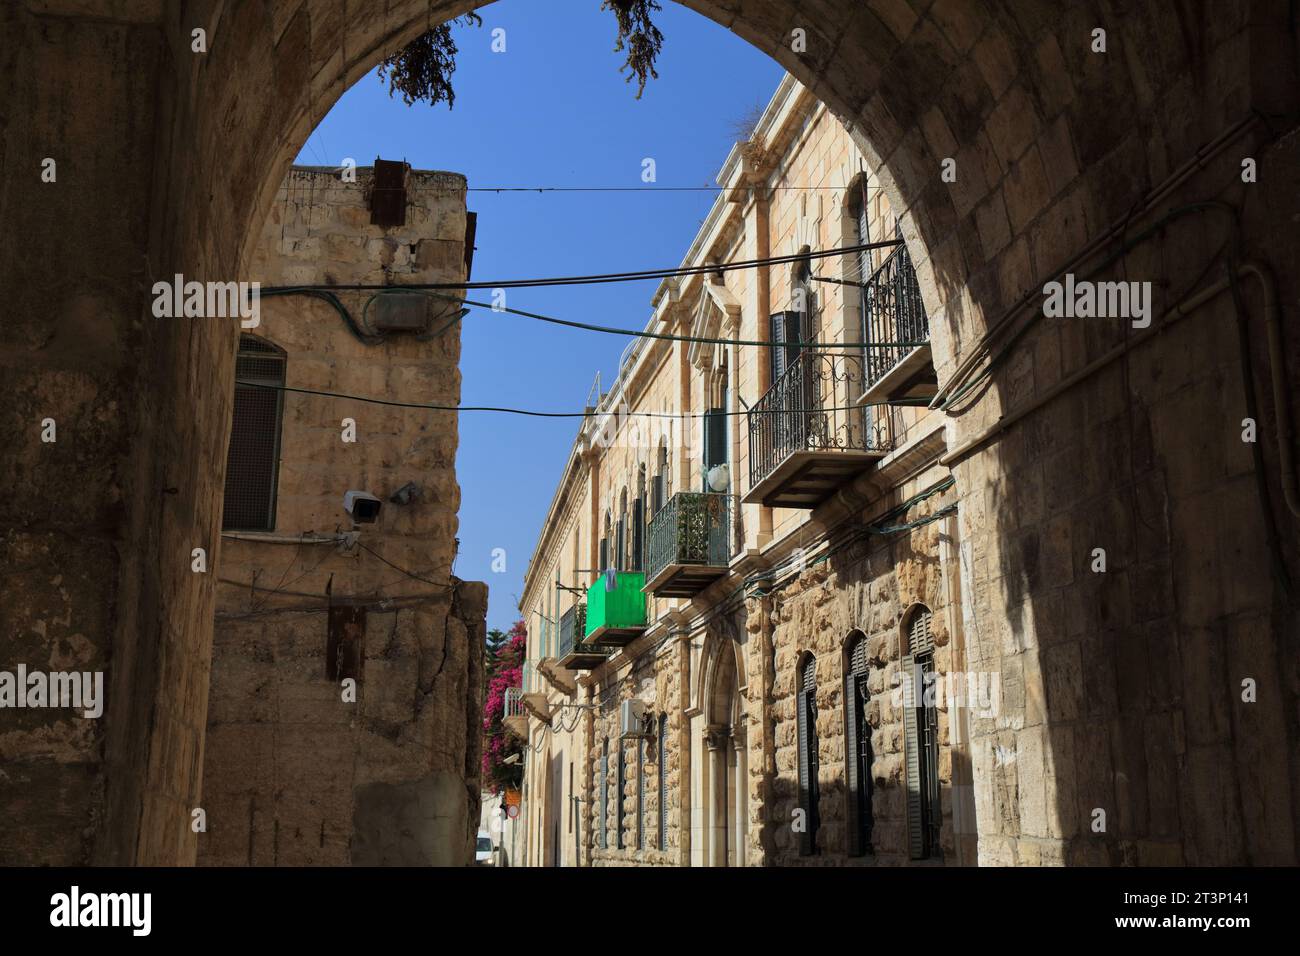 Jerusalem Old Town, Israel. Street view from the Lion's Gate in Muslim Quarter. Stock Photo